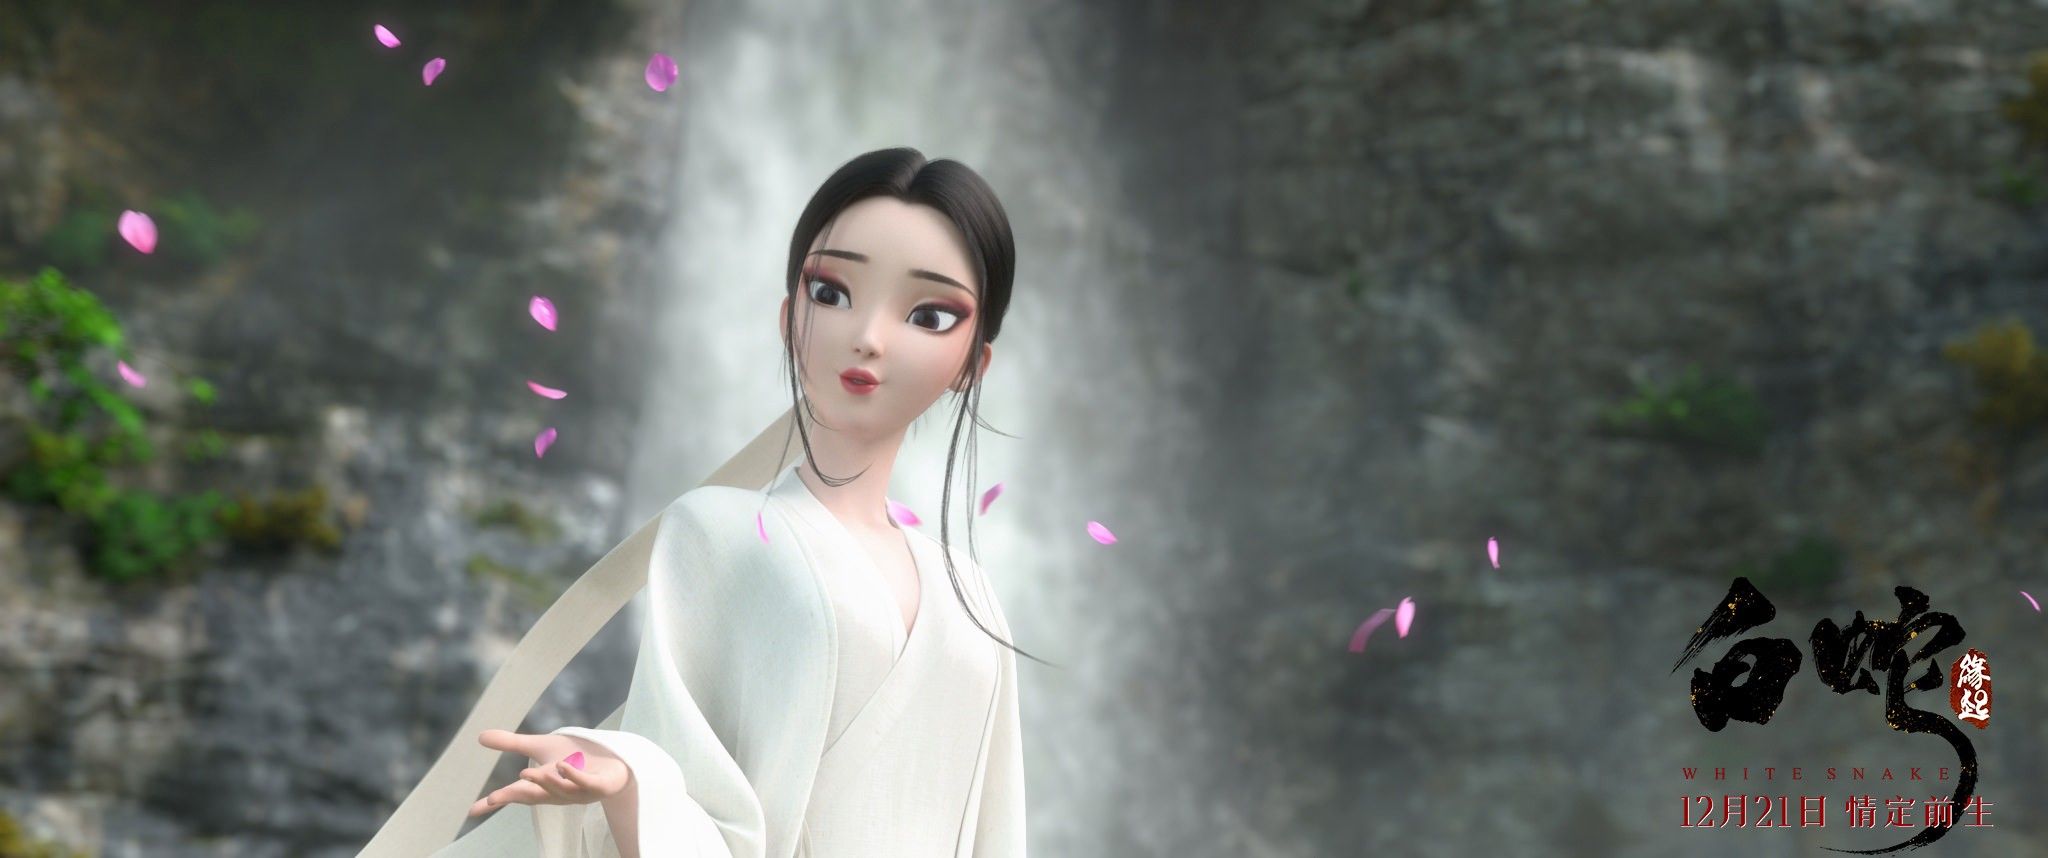 Enter the Fantasy World of Chinese Anime Movie “White Snake” in this Series of Newly Released HD Still Image.